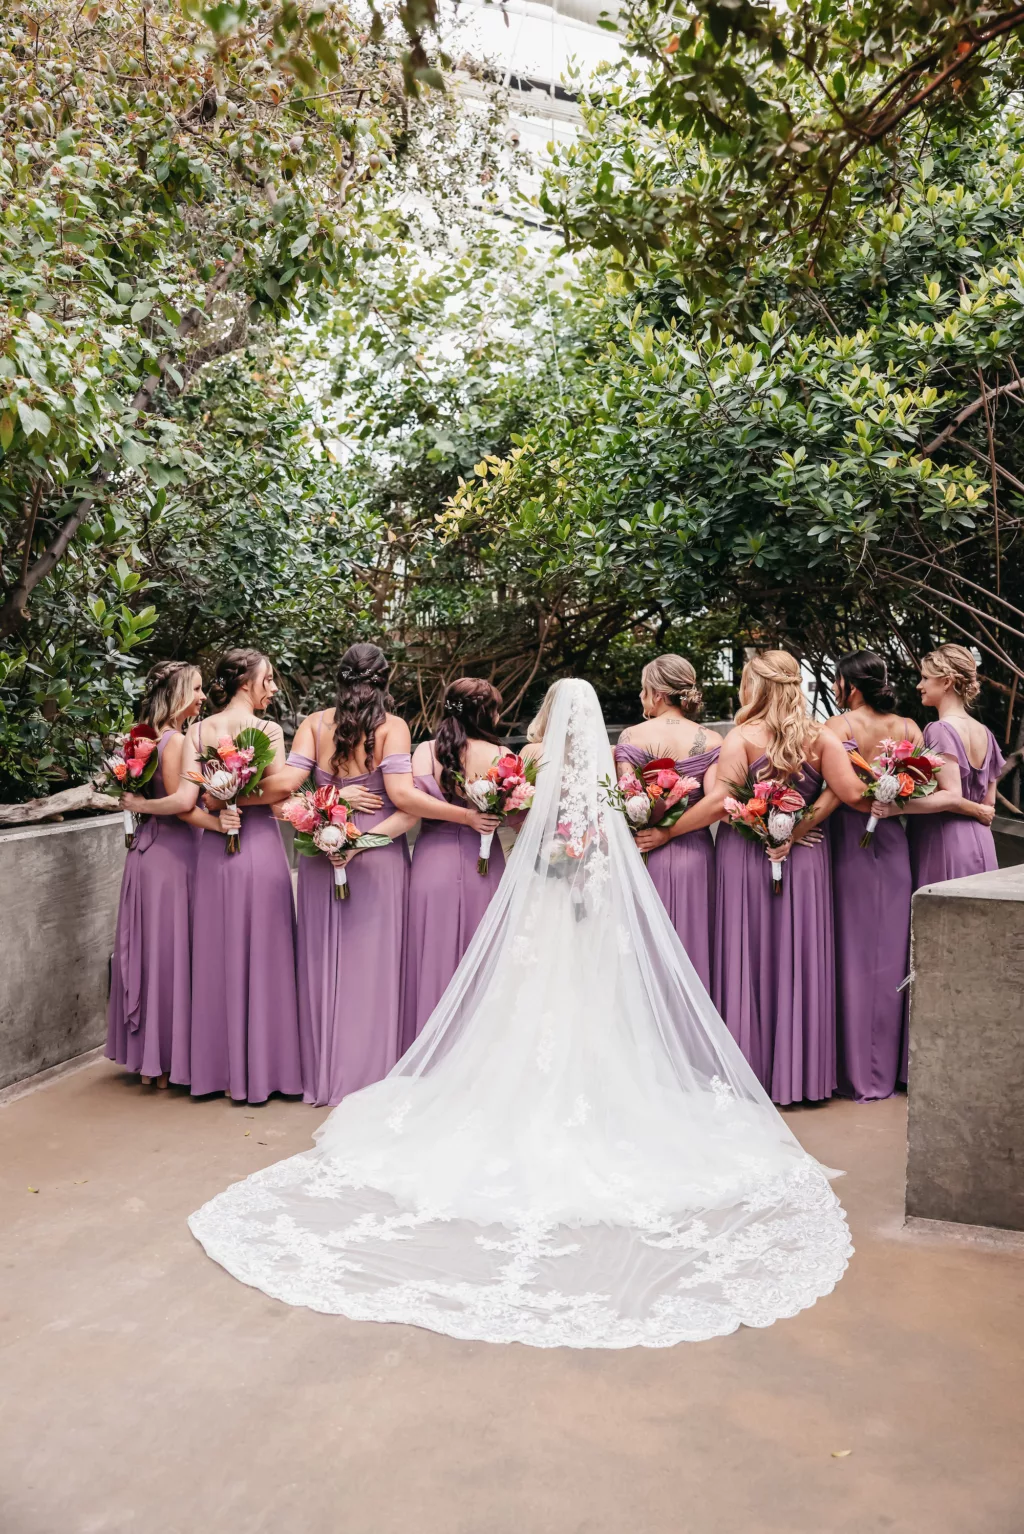 Mismatched Lavender Bridesmaids Dresses | White Lace A-Line Wedding Dress with Cathedral Veil Inspiration | Tampa Bay Bridal Boutique Truly Forever Bridal Tampa | Florist Save The Date Florida